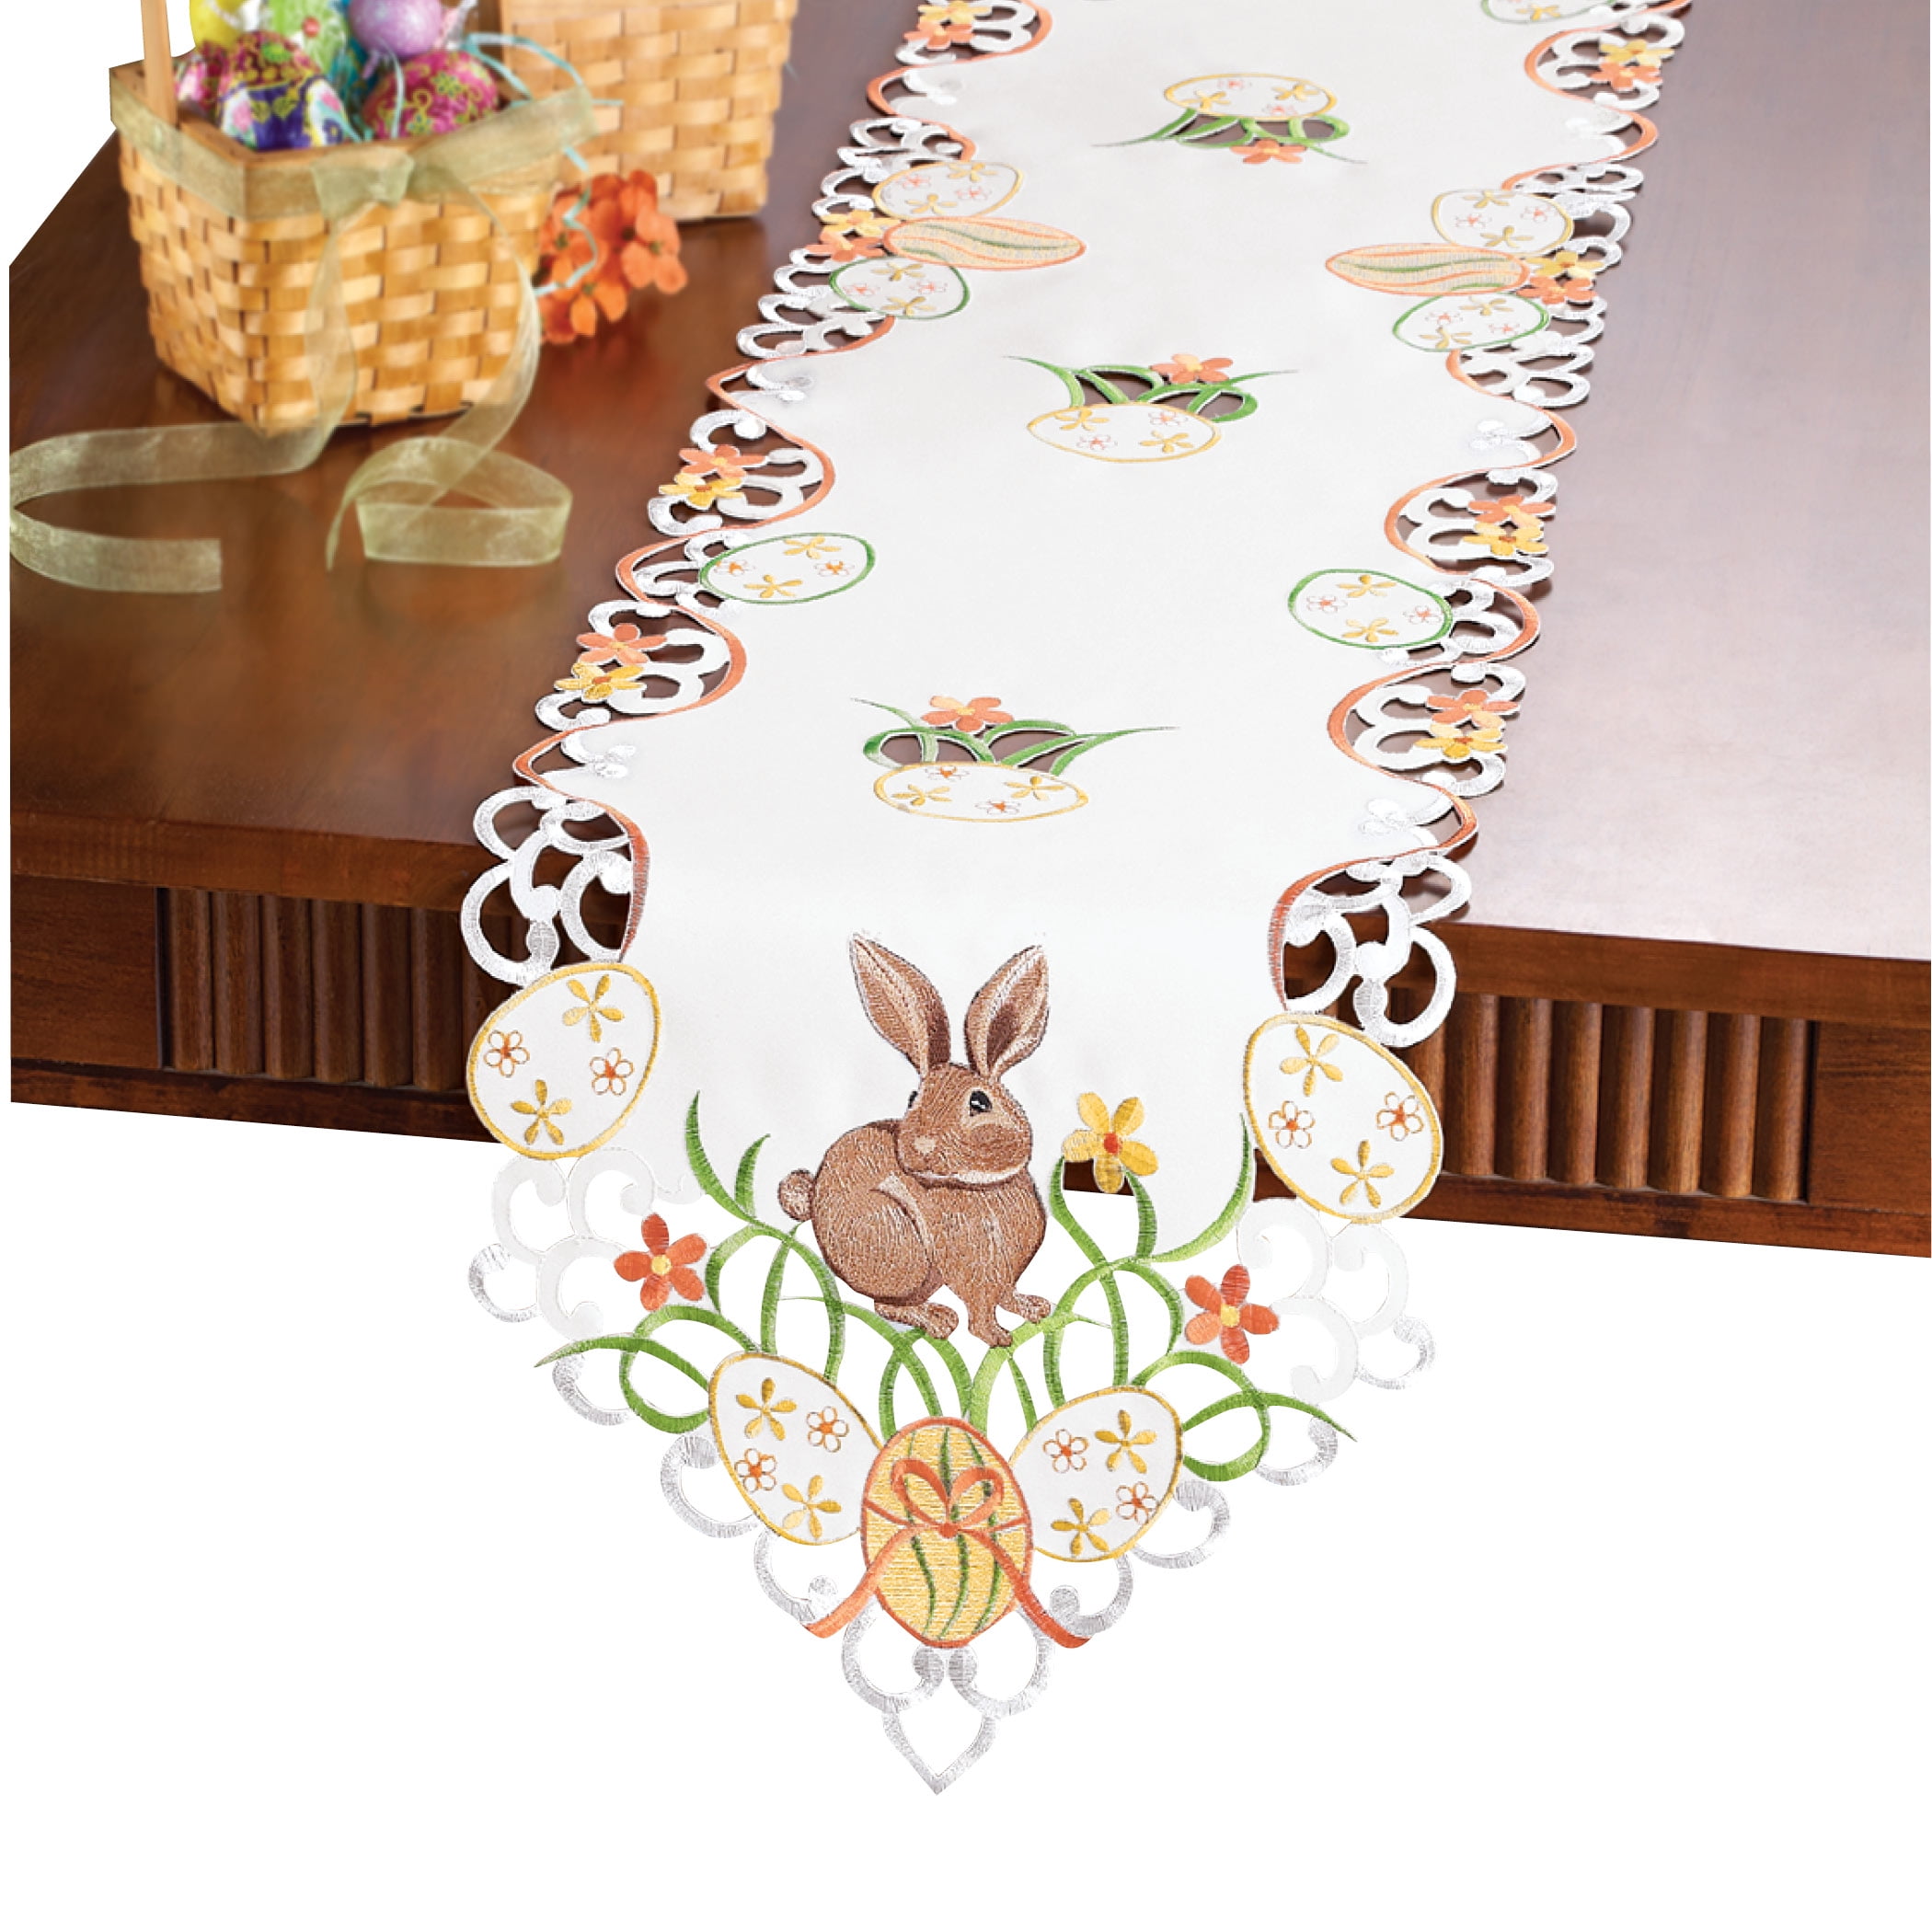 Easter Placemats with a Cross & scroll design